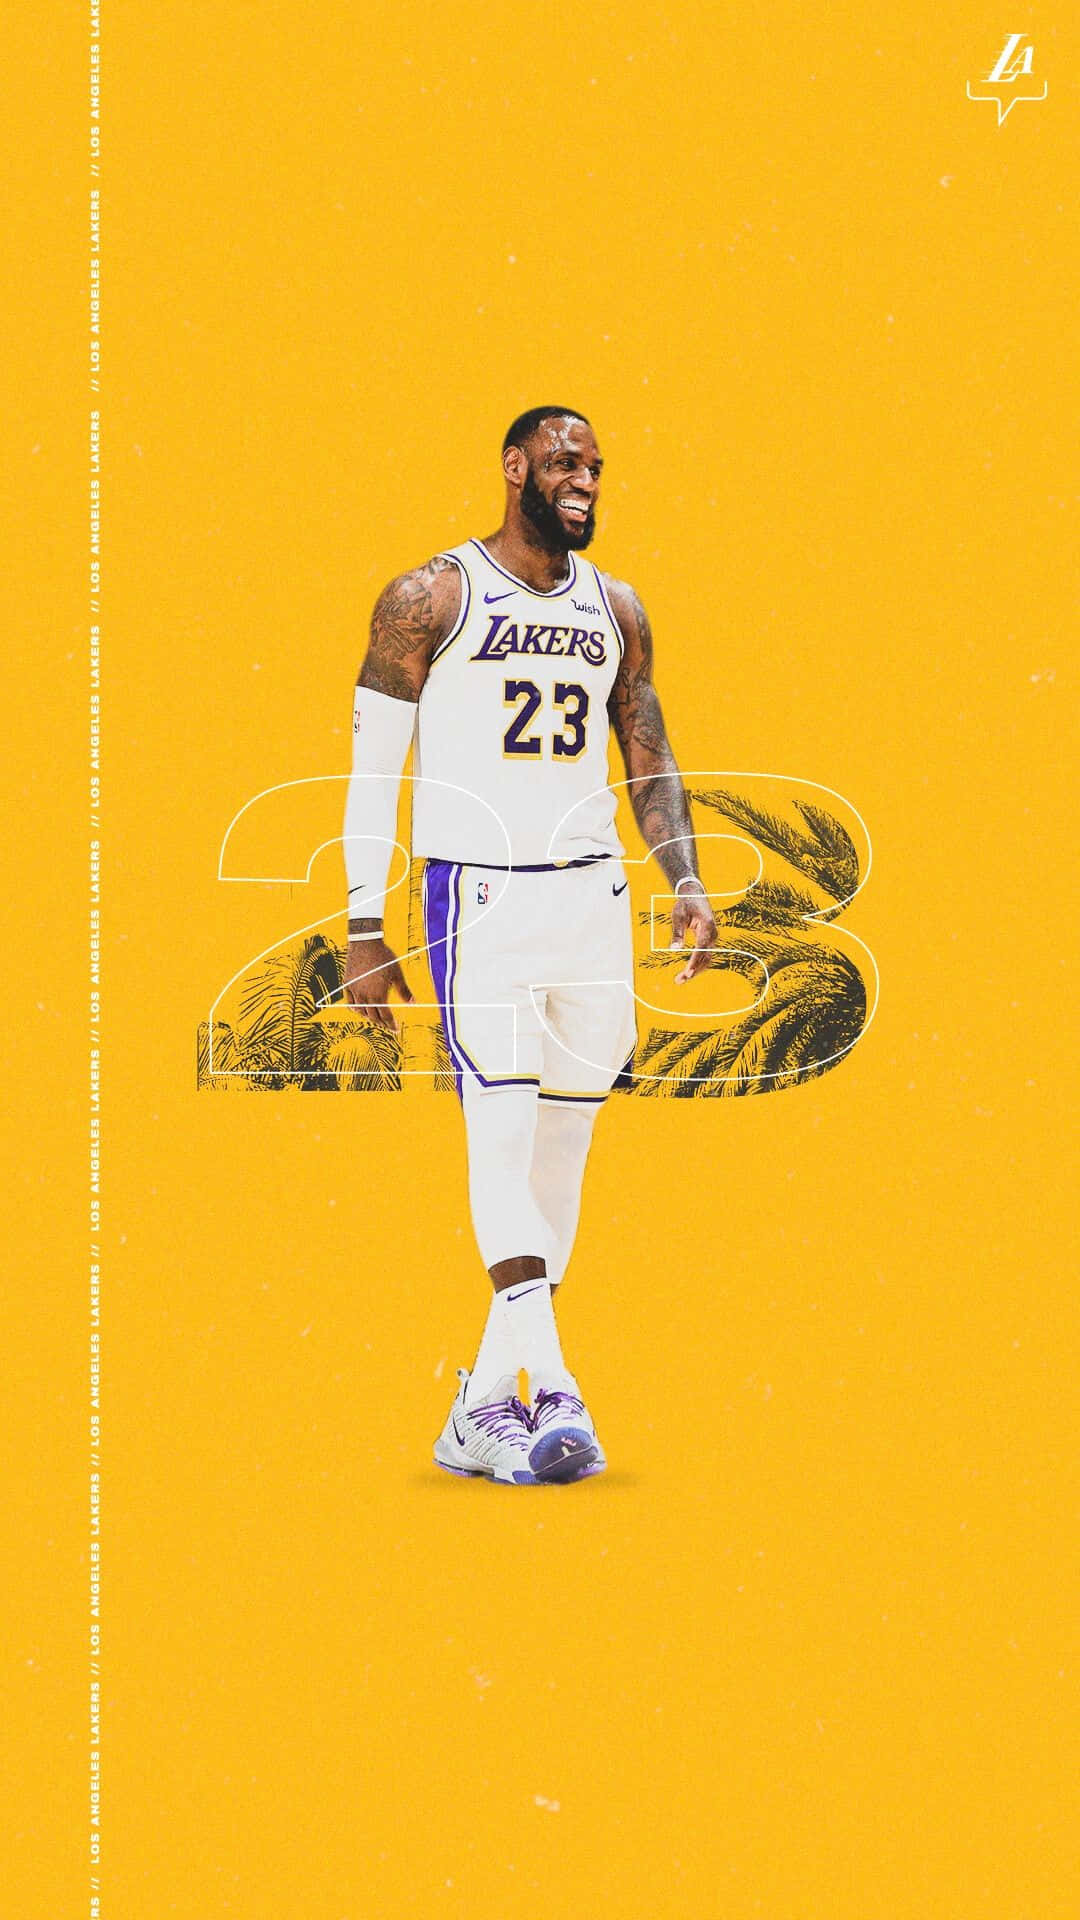 LeBron James Wallpaper: 20 Crazy Cool Designs to Style your Space!